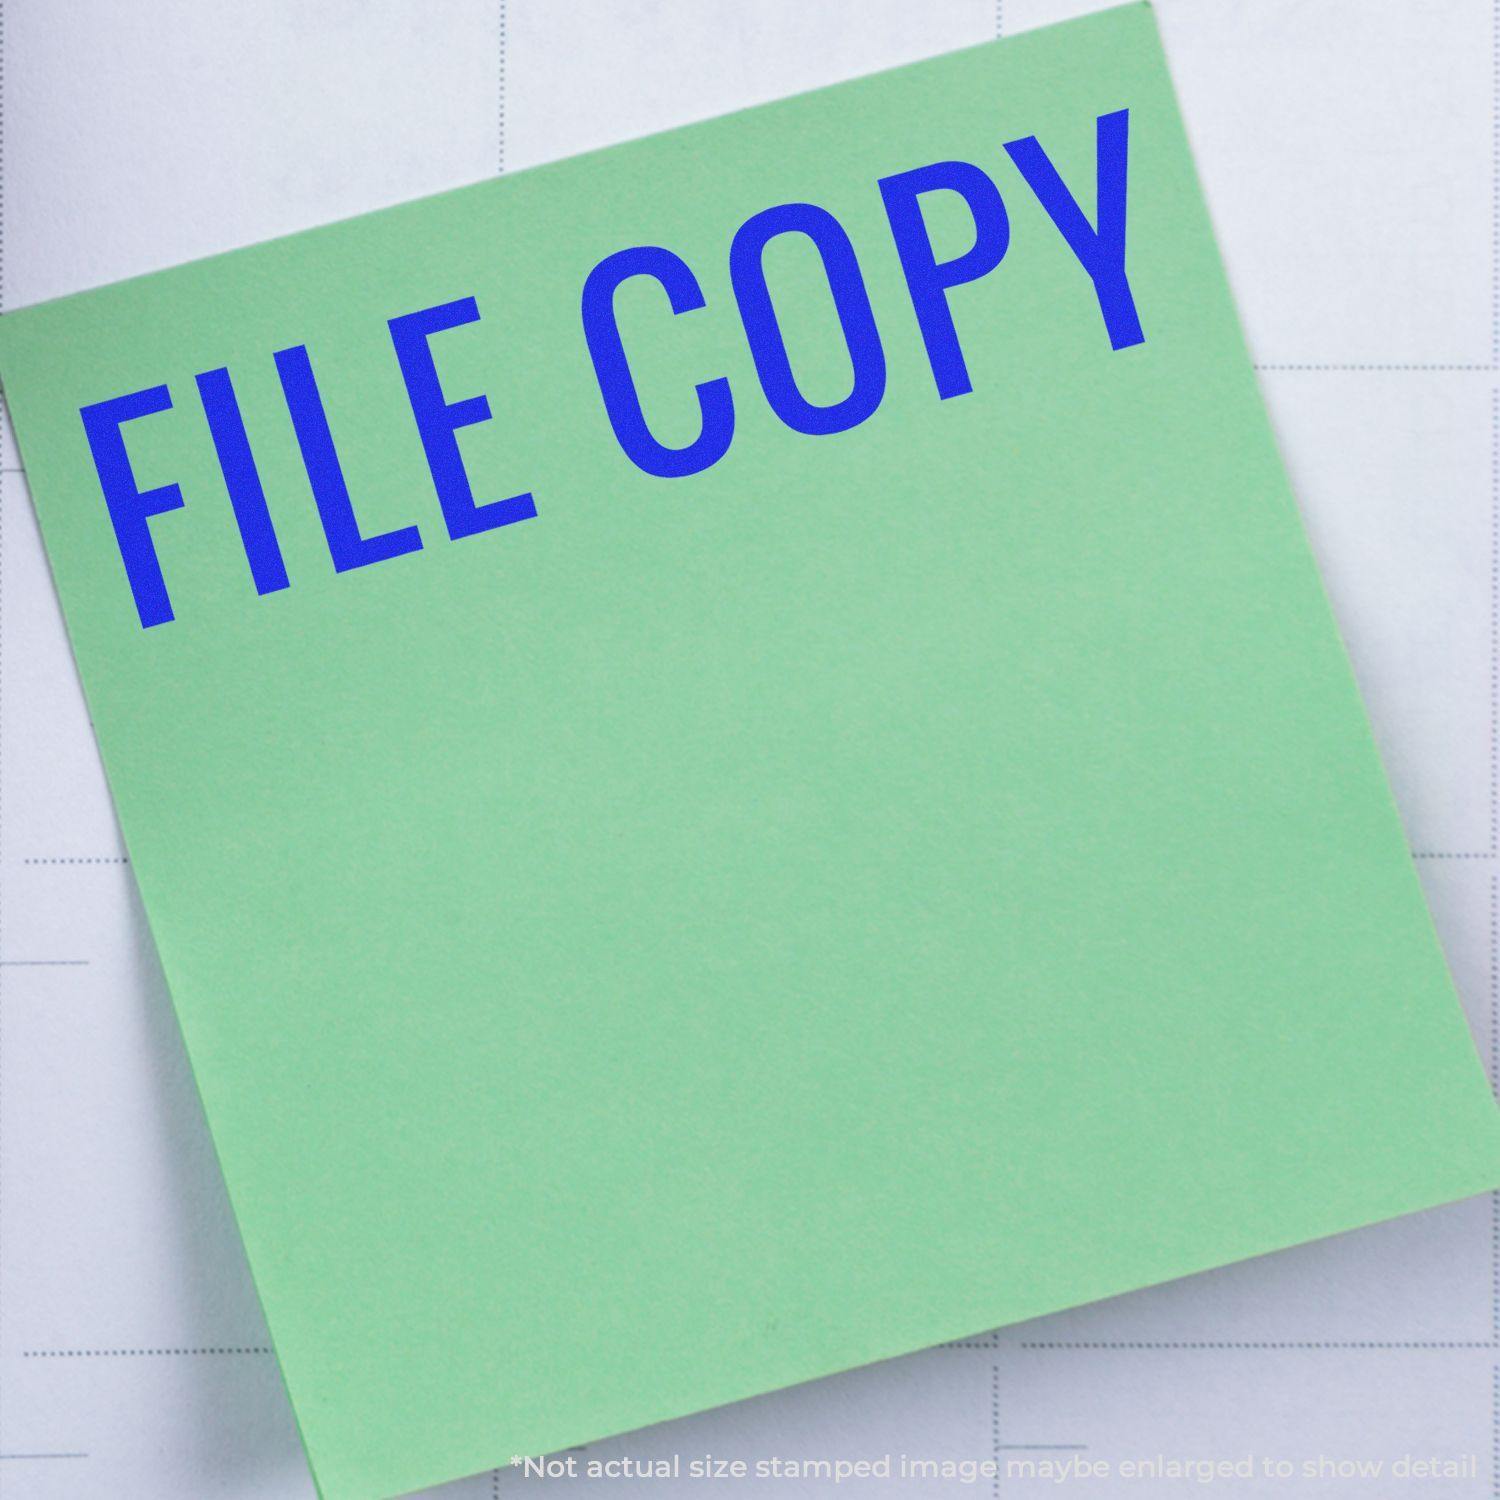 A stock office rubber stamp with a stamped image showing how the text "FILE COPY" in a large narrow font is displayed after stamping.